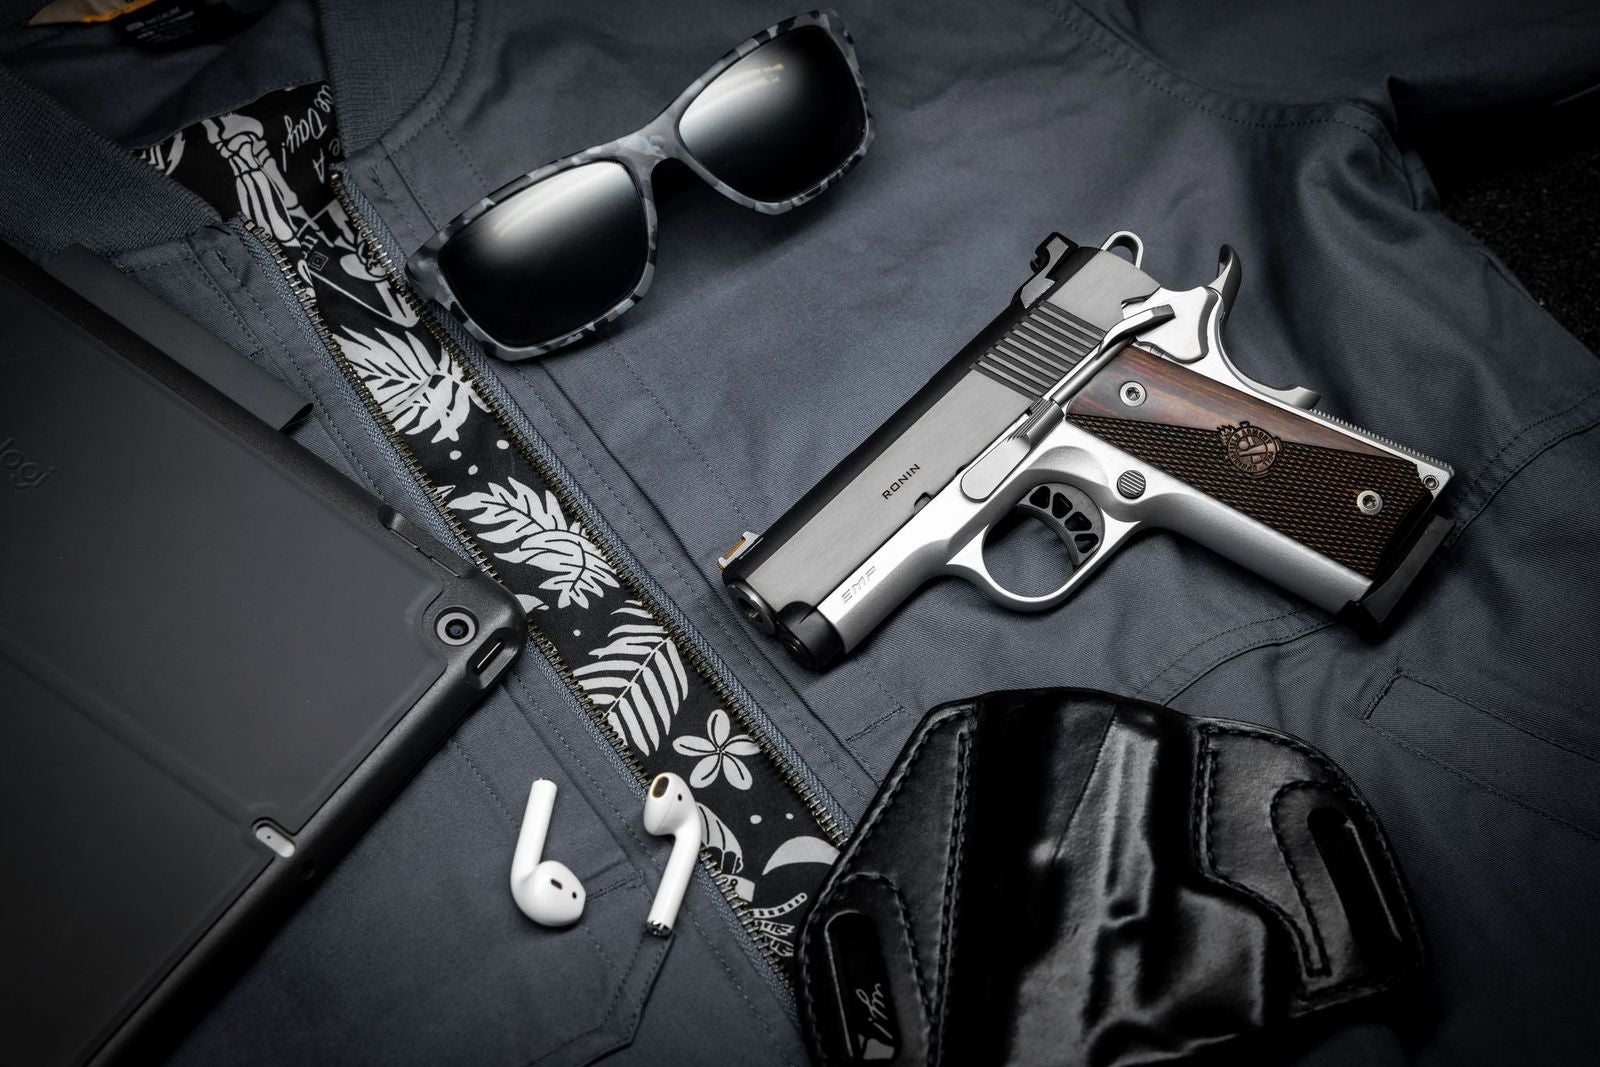 The New Ronin EMP 1911 Pistol from Springfield Armory